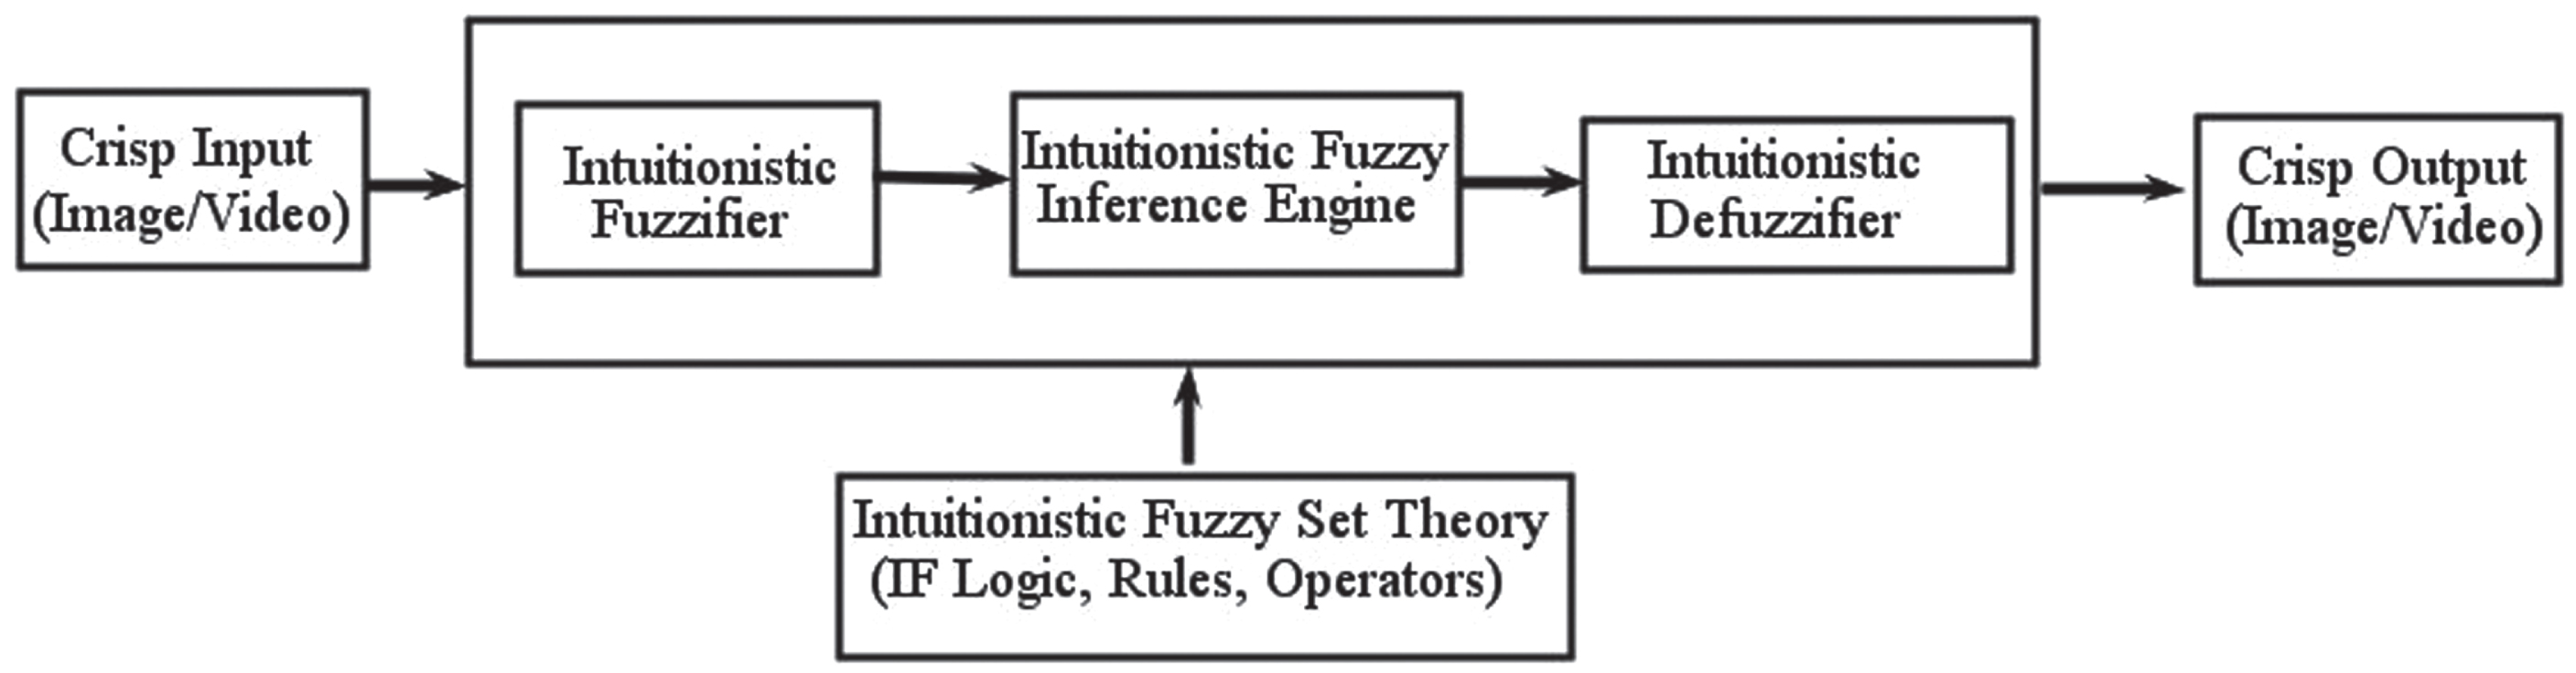 Structure of an intuitionistic fuzzy inference system.